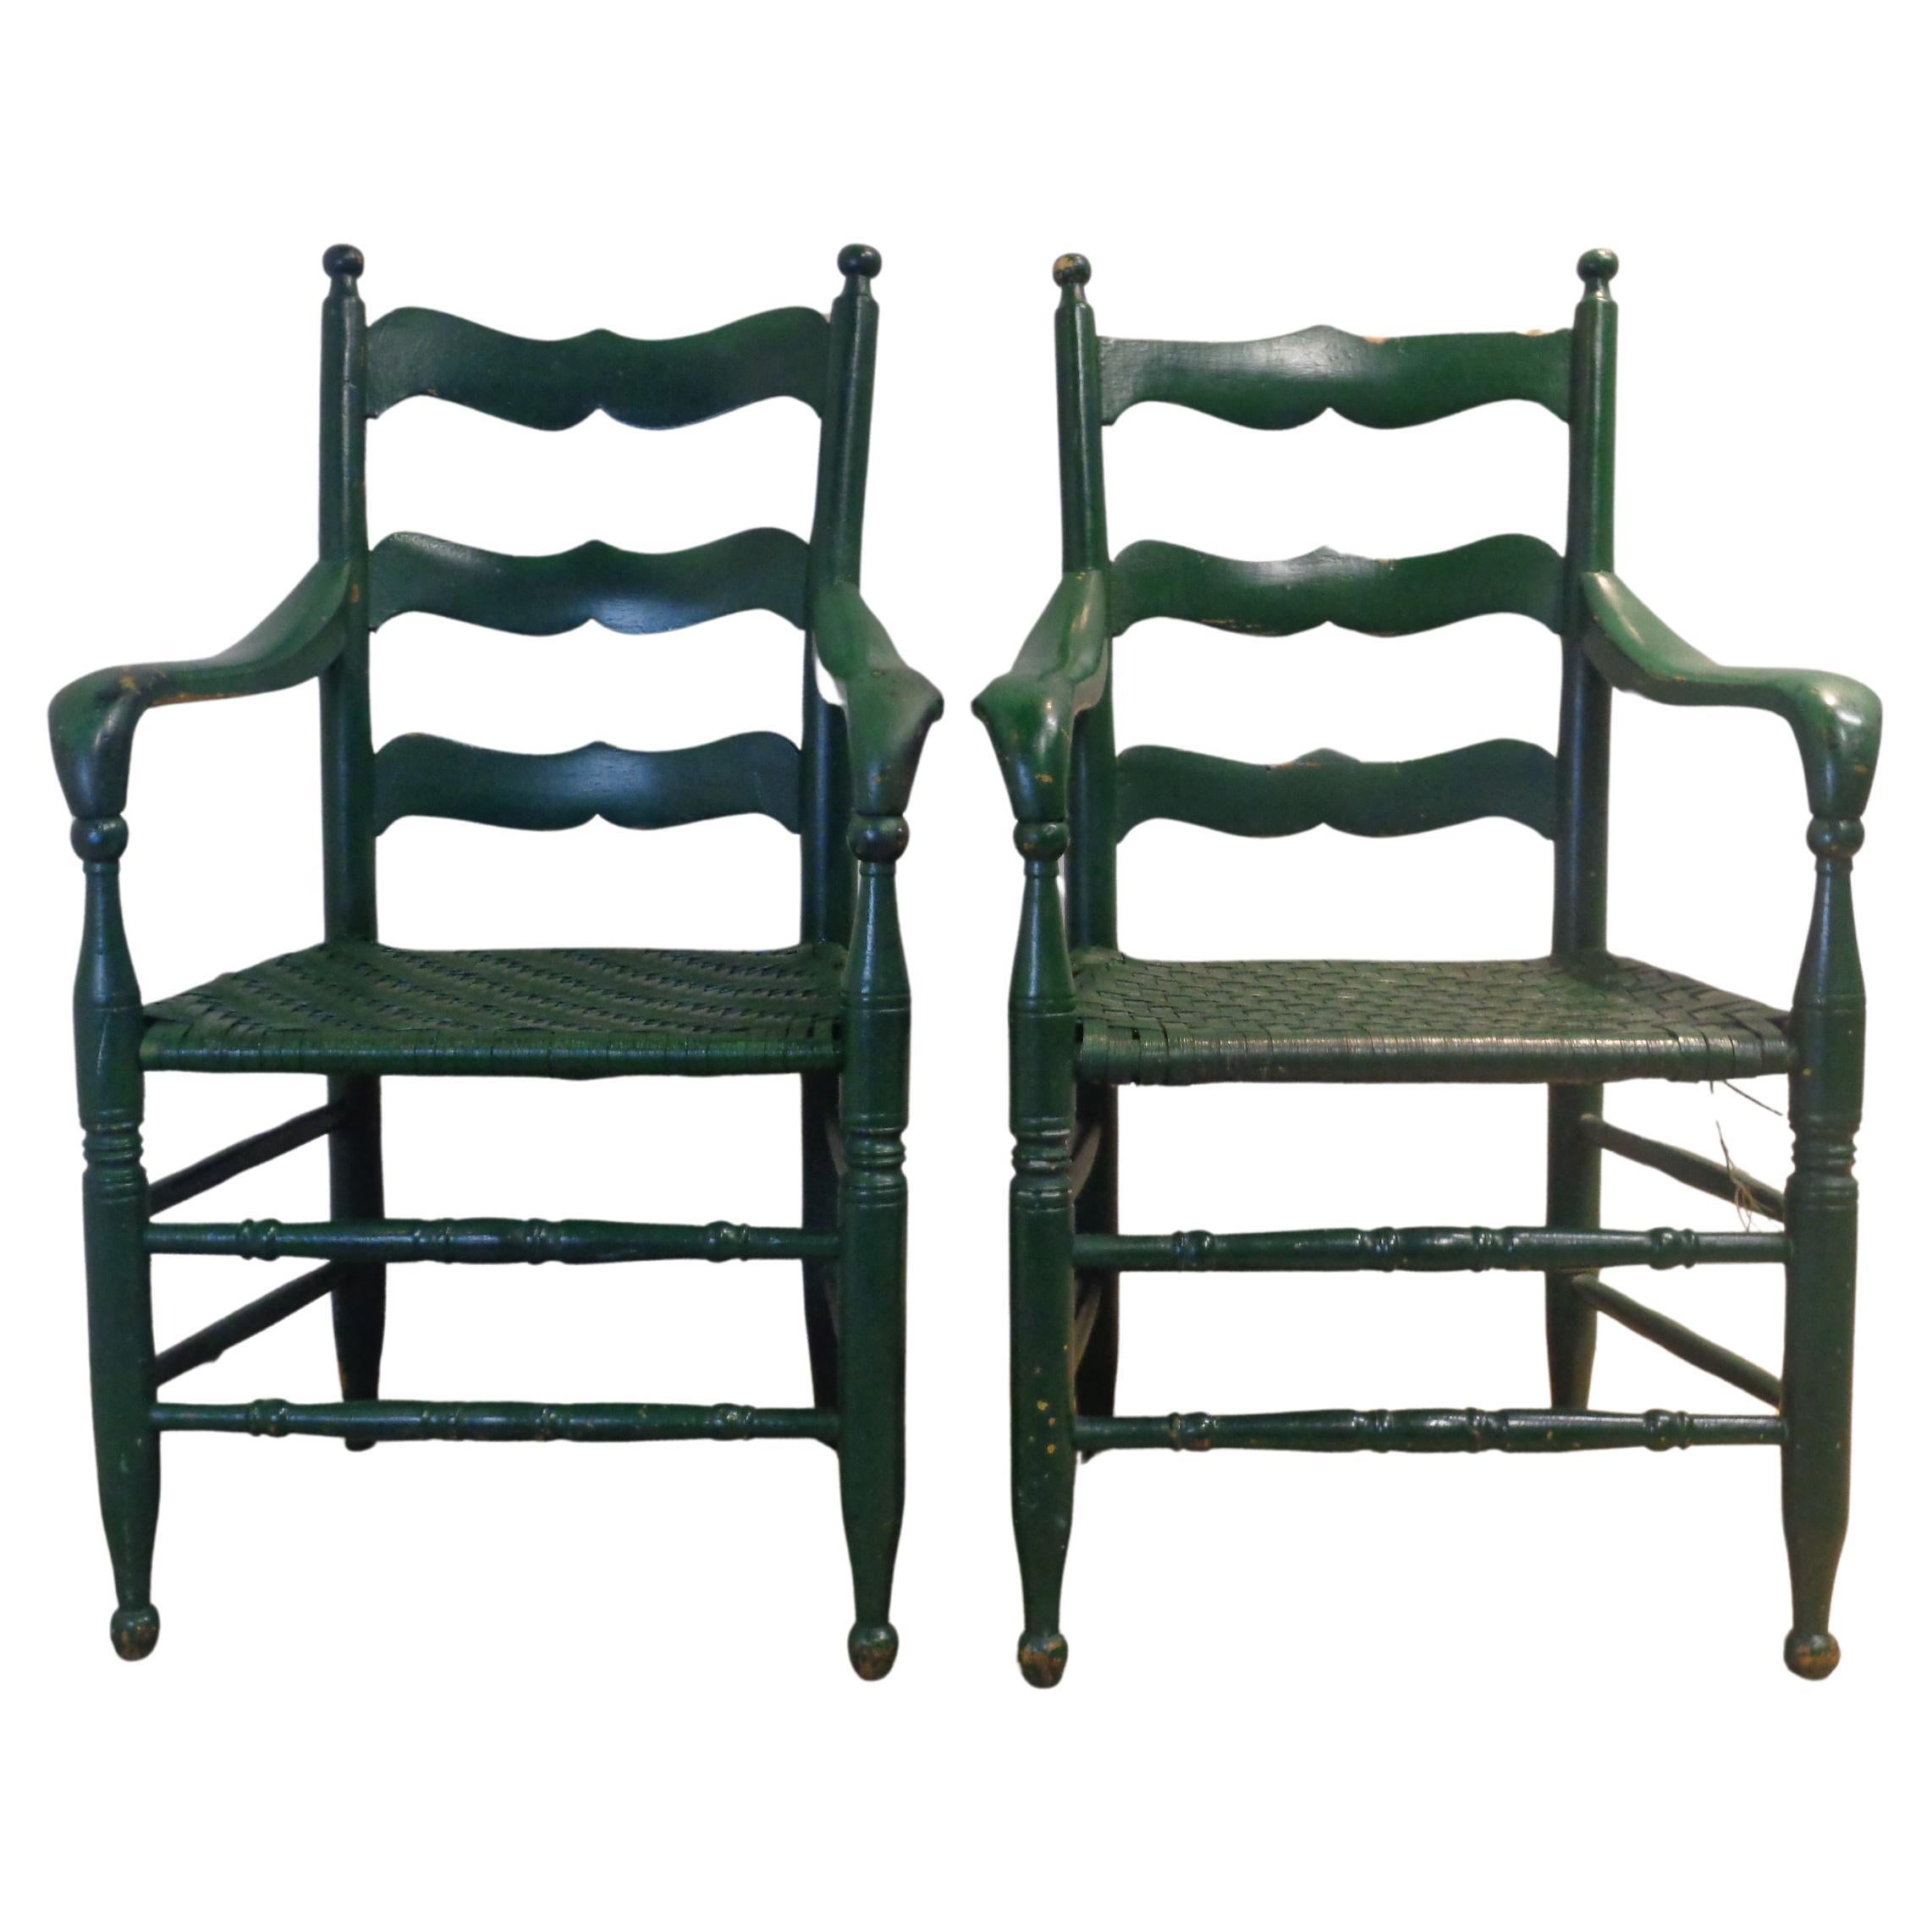 Pair of antique American country  armchairs w/ beautifully shaped wide arms / woven splint reed seats and nicely aged old dark green painted surface. $PRICE IS FOR THE PAIR$ Look at all pictures and read condition report in comment section **** HAND